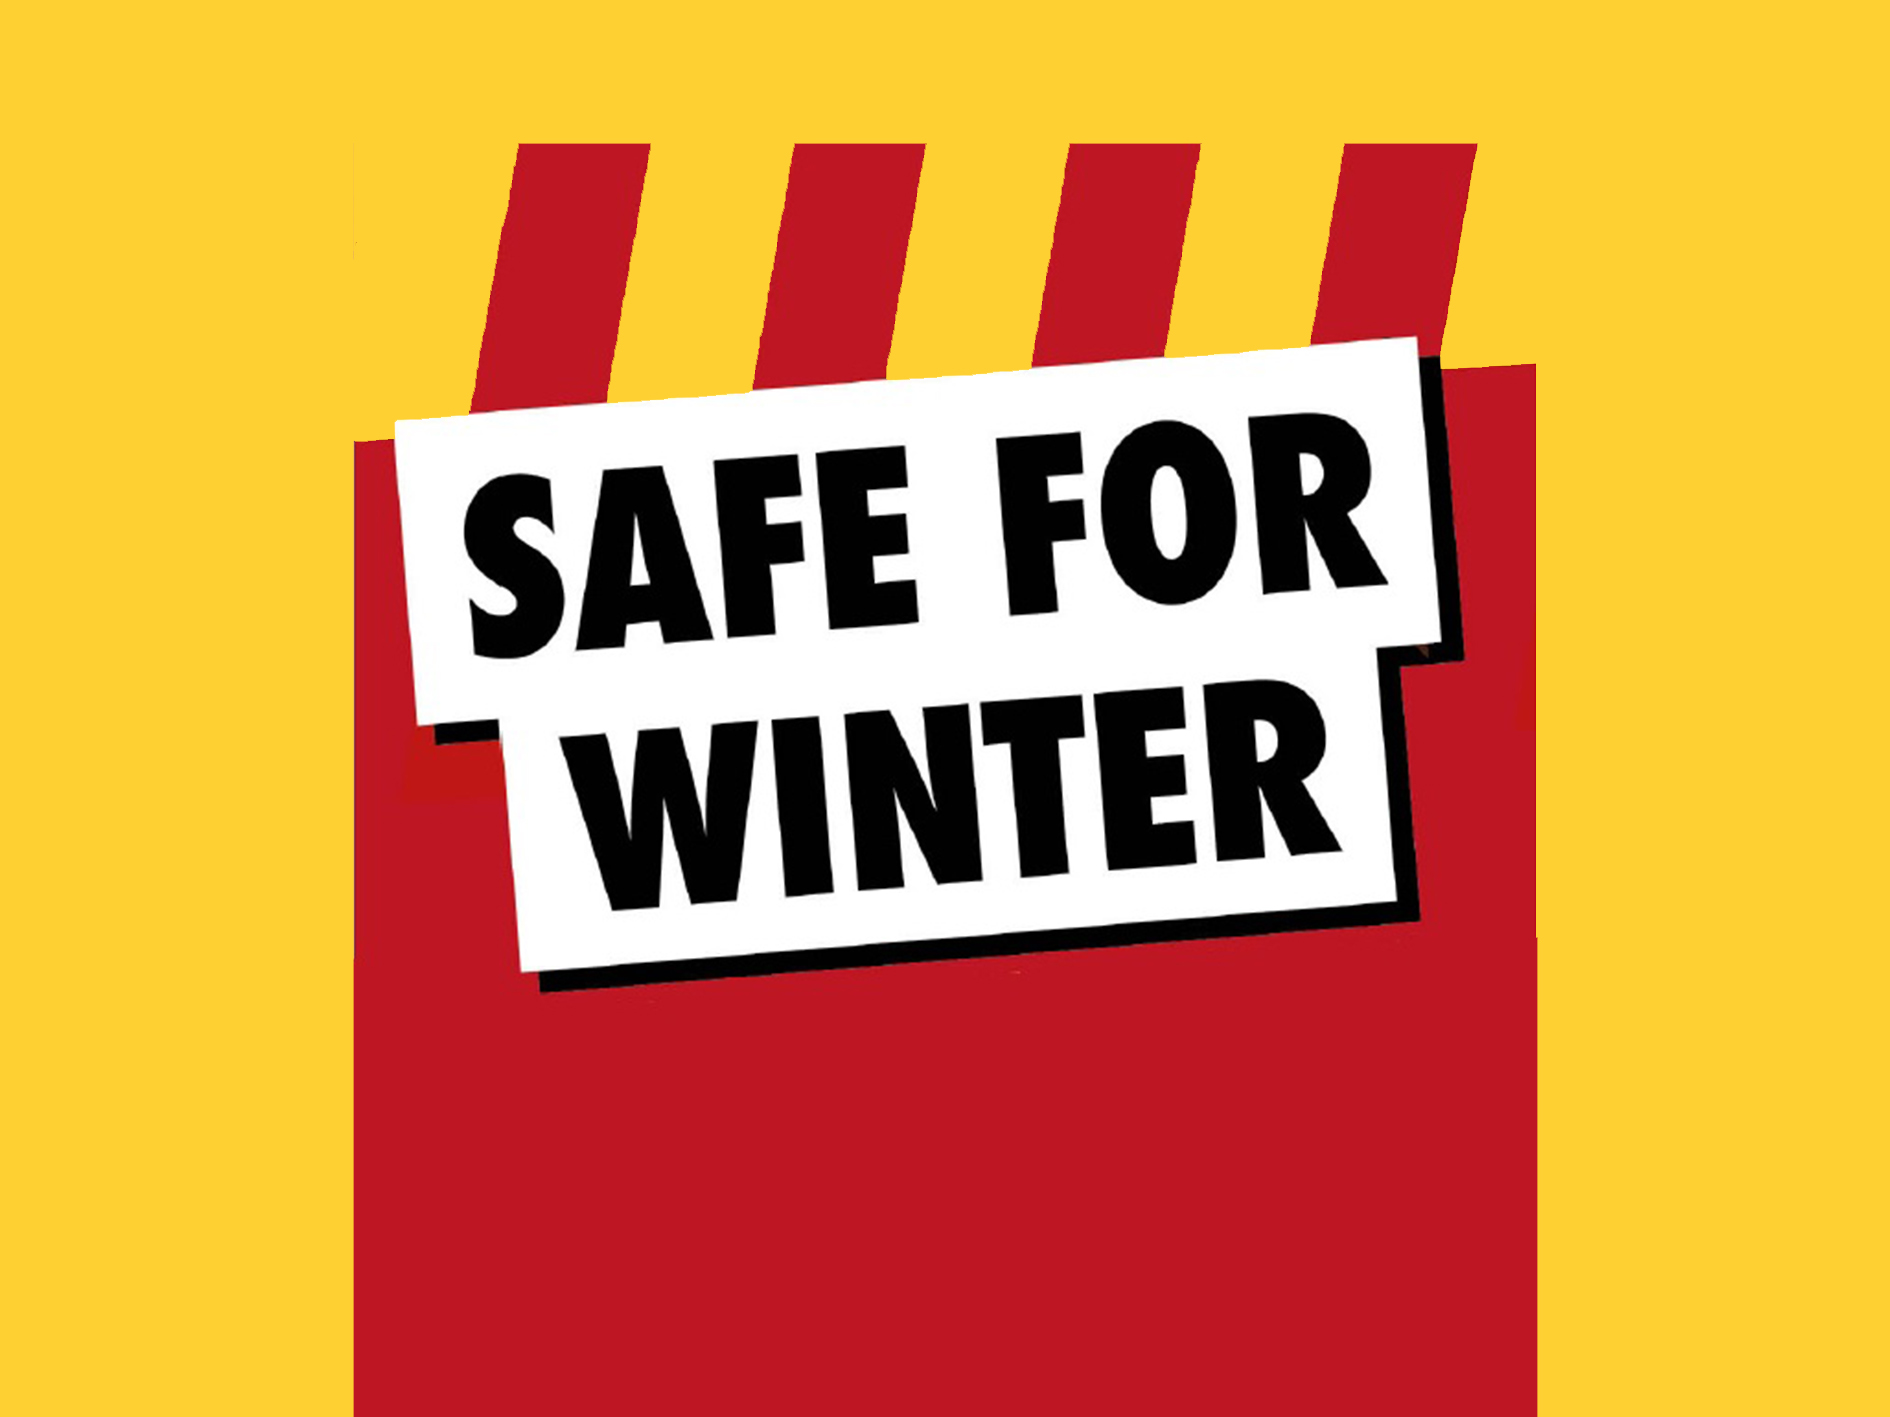 Section on safe for winter